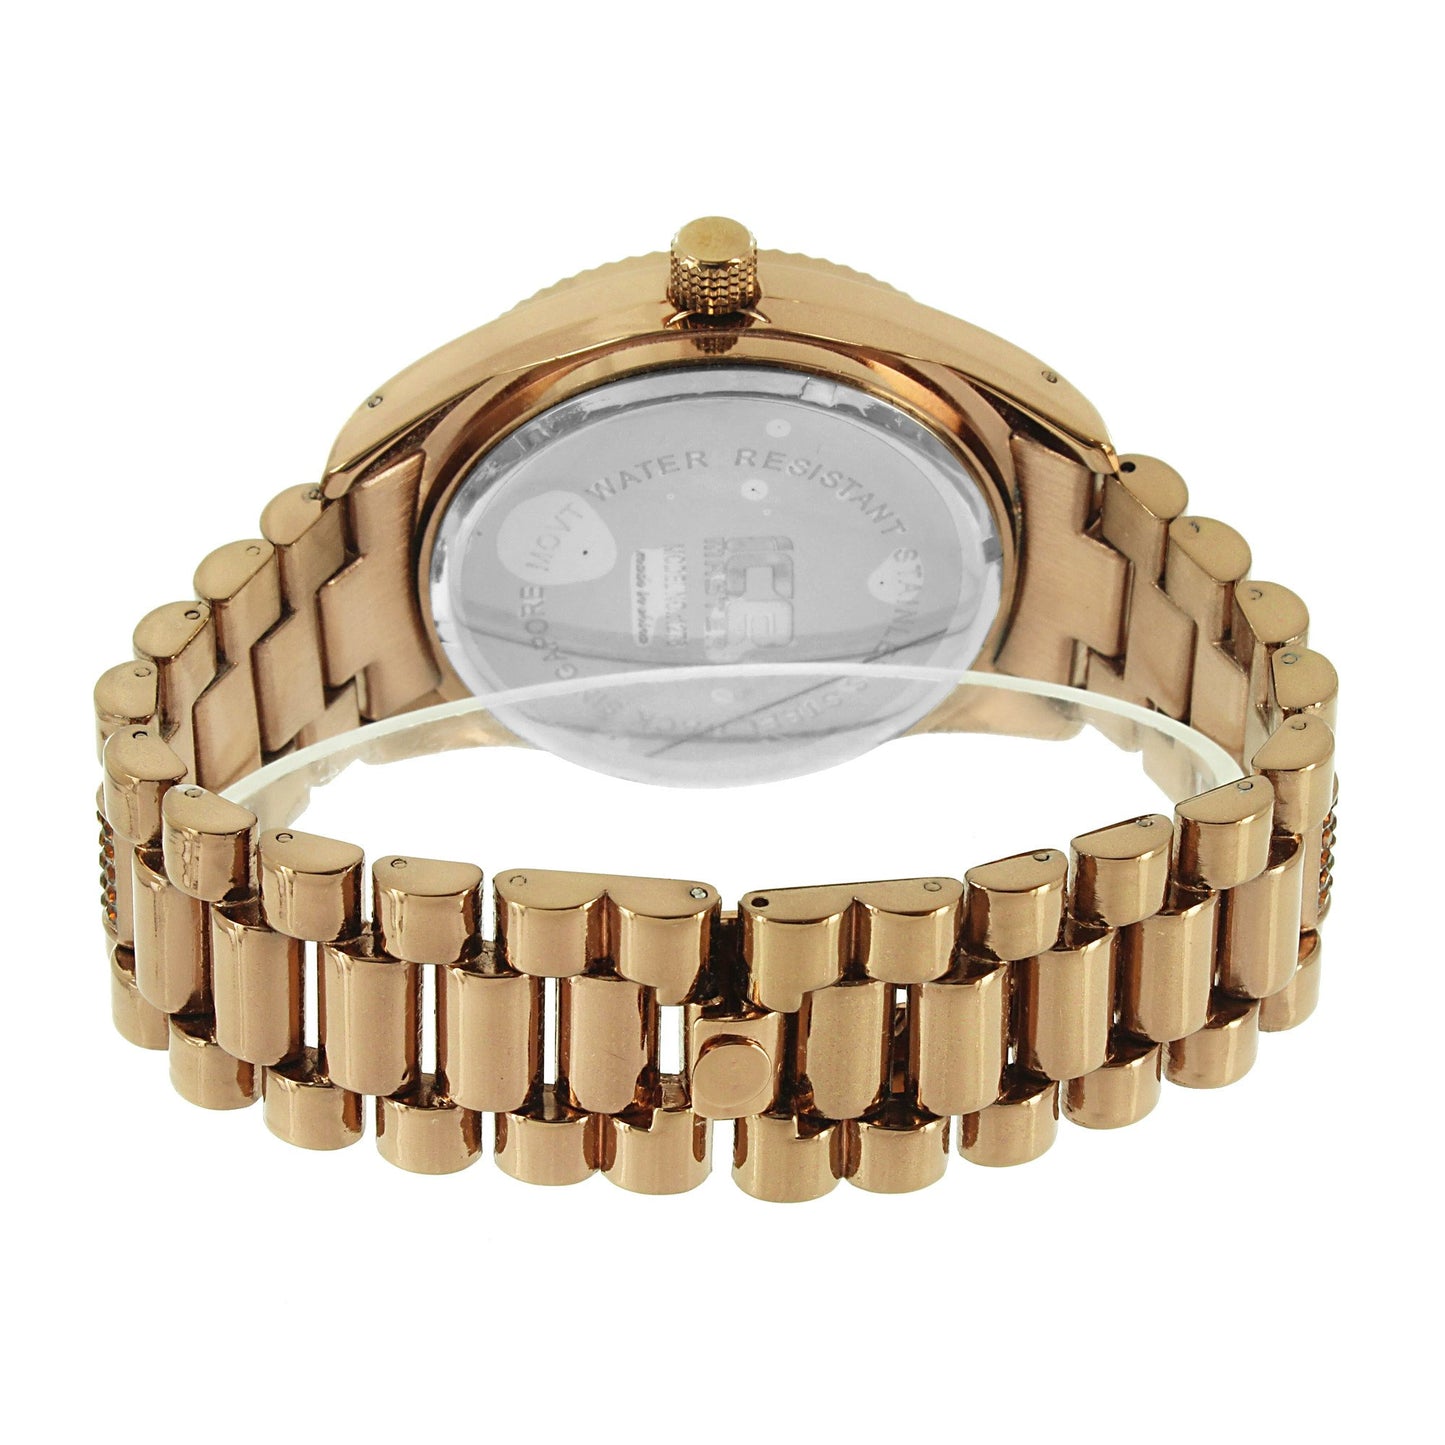 Fluted Bezel Watch Matching Bracelet Brown Bling Illusion Dial Classy